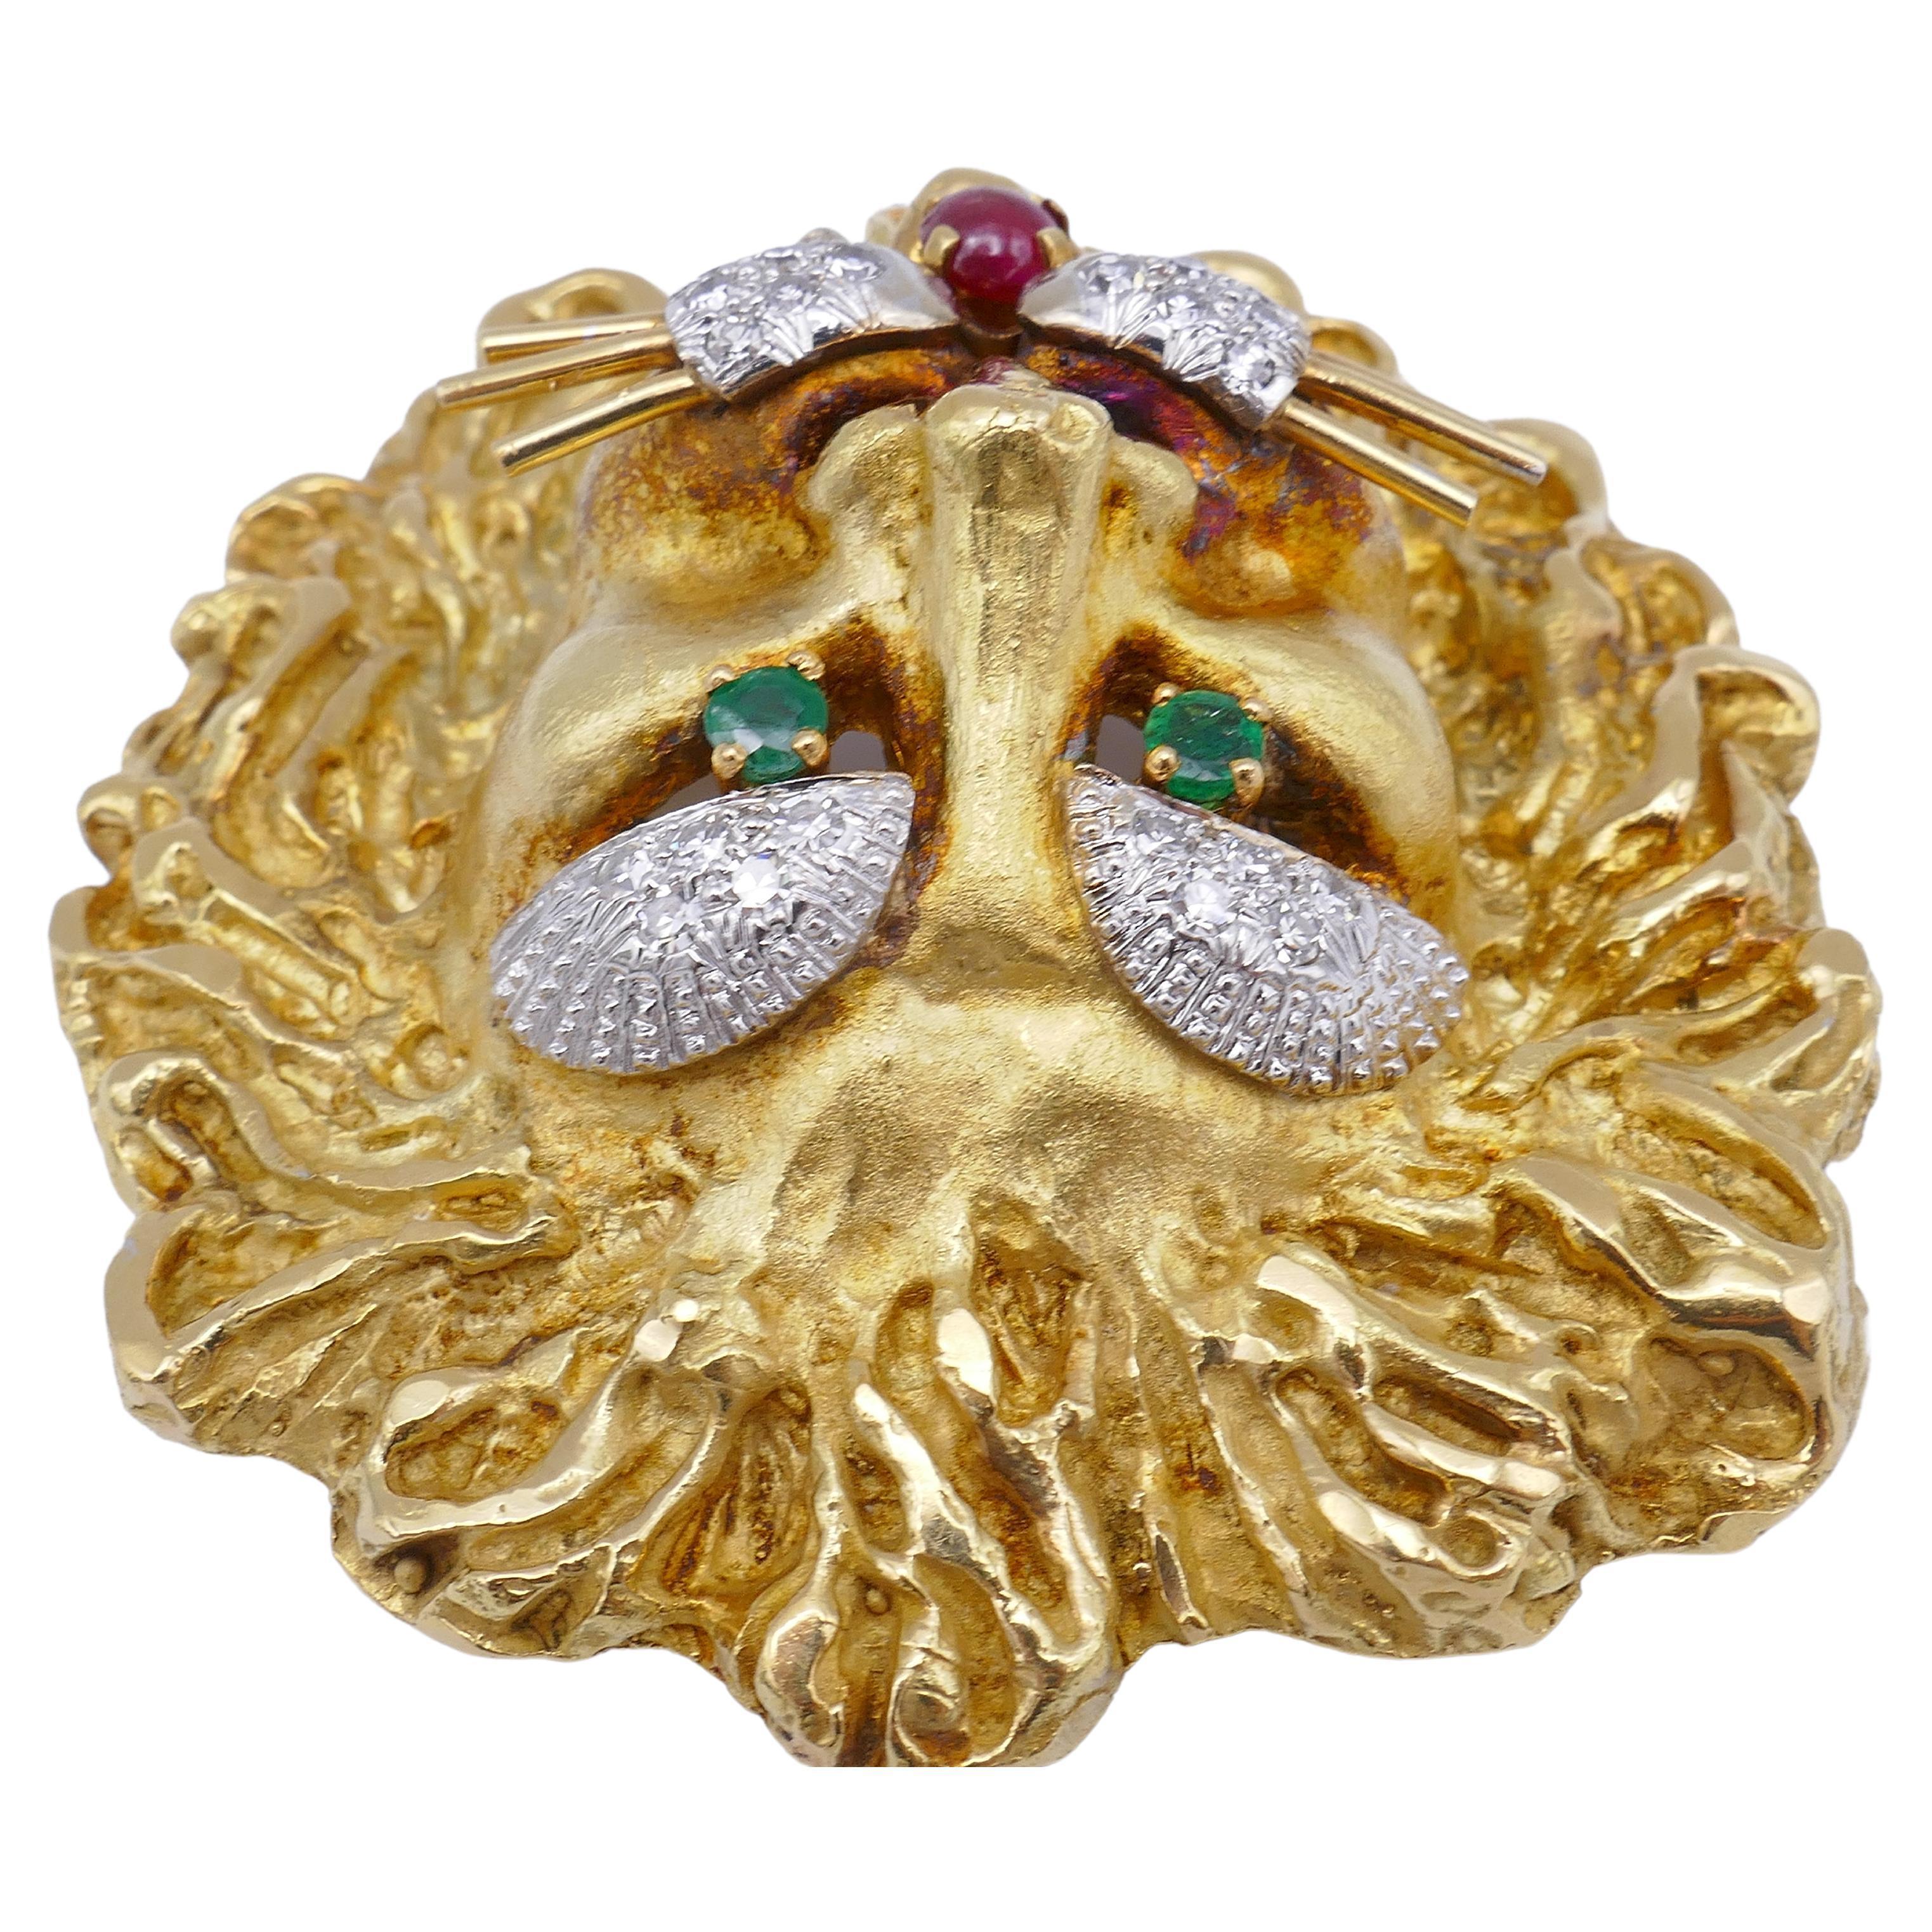 A gorgeous Leo pendant by Hammerman Brothers made of 18k gold, features diamonds and colored gemstones.
The pendant is designed as a head of lion with a mane. The latter is crafted of textured gold, and the face has a matte finish. 
The piece